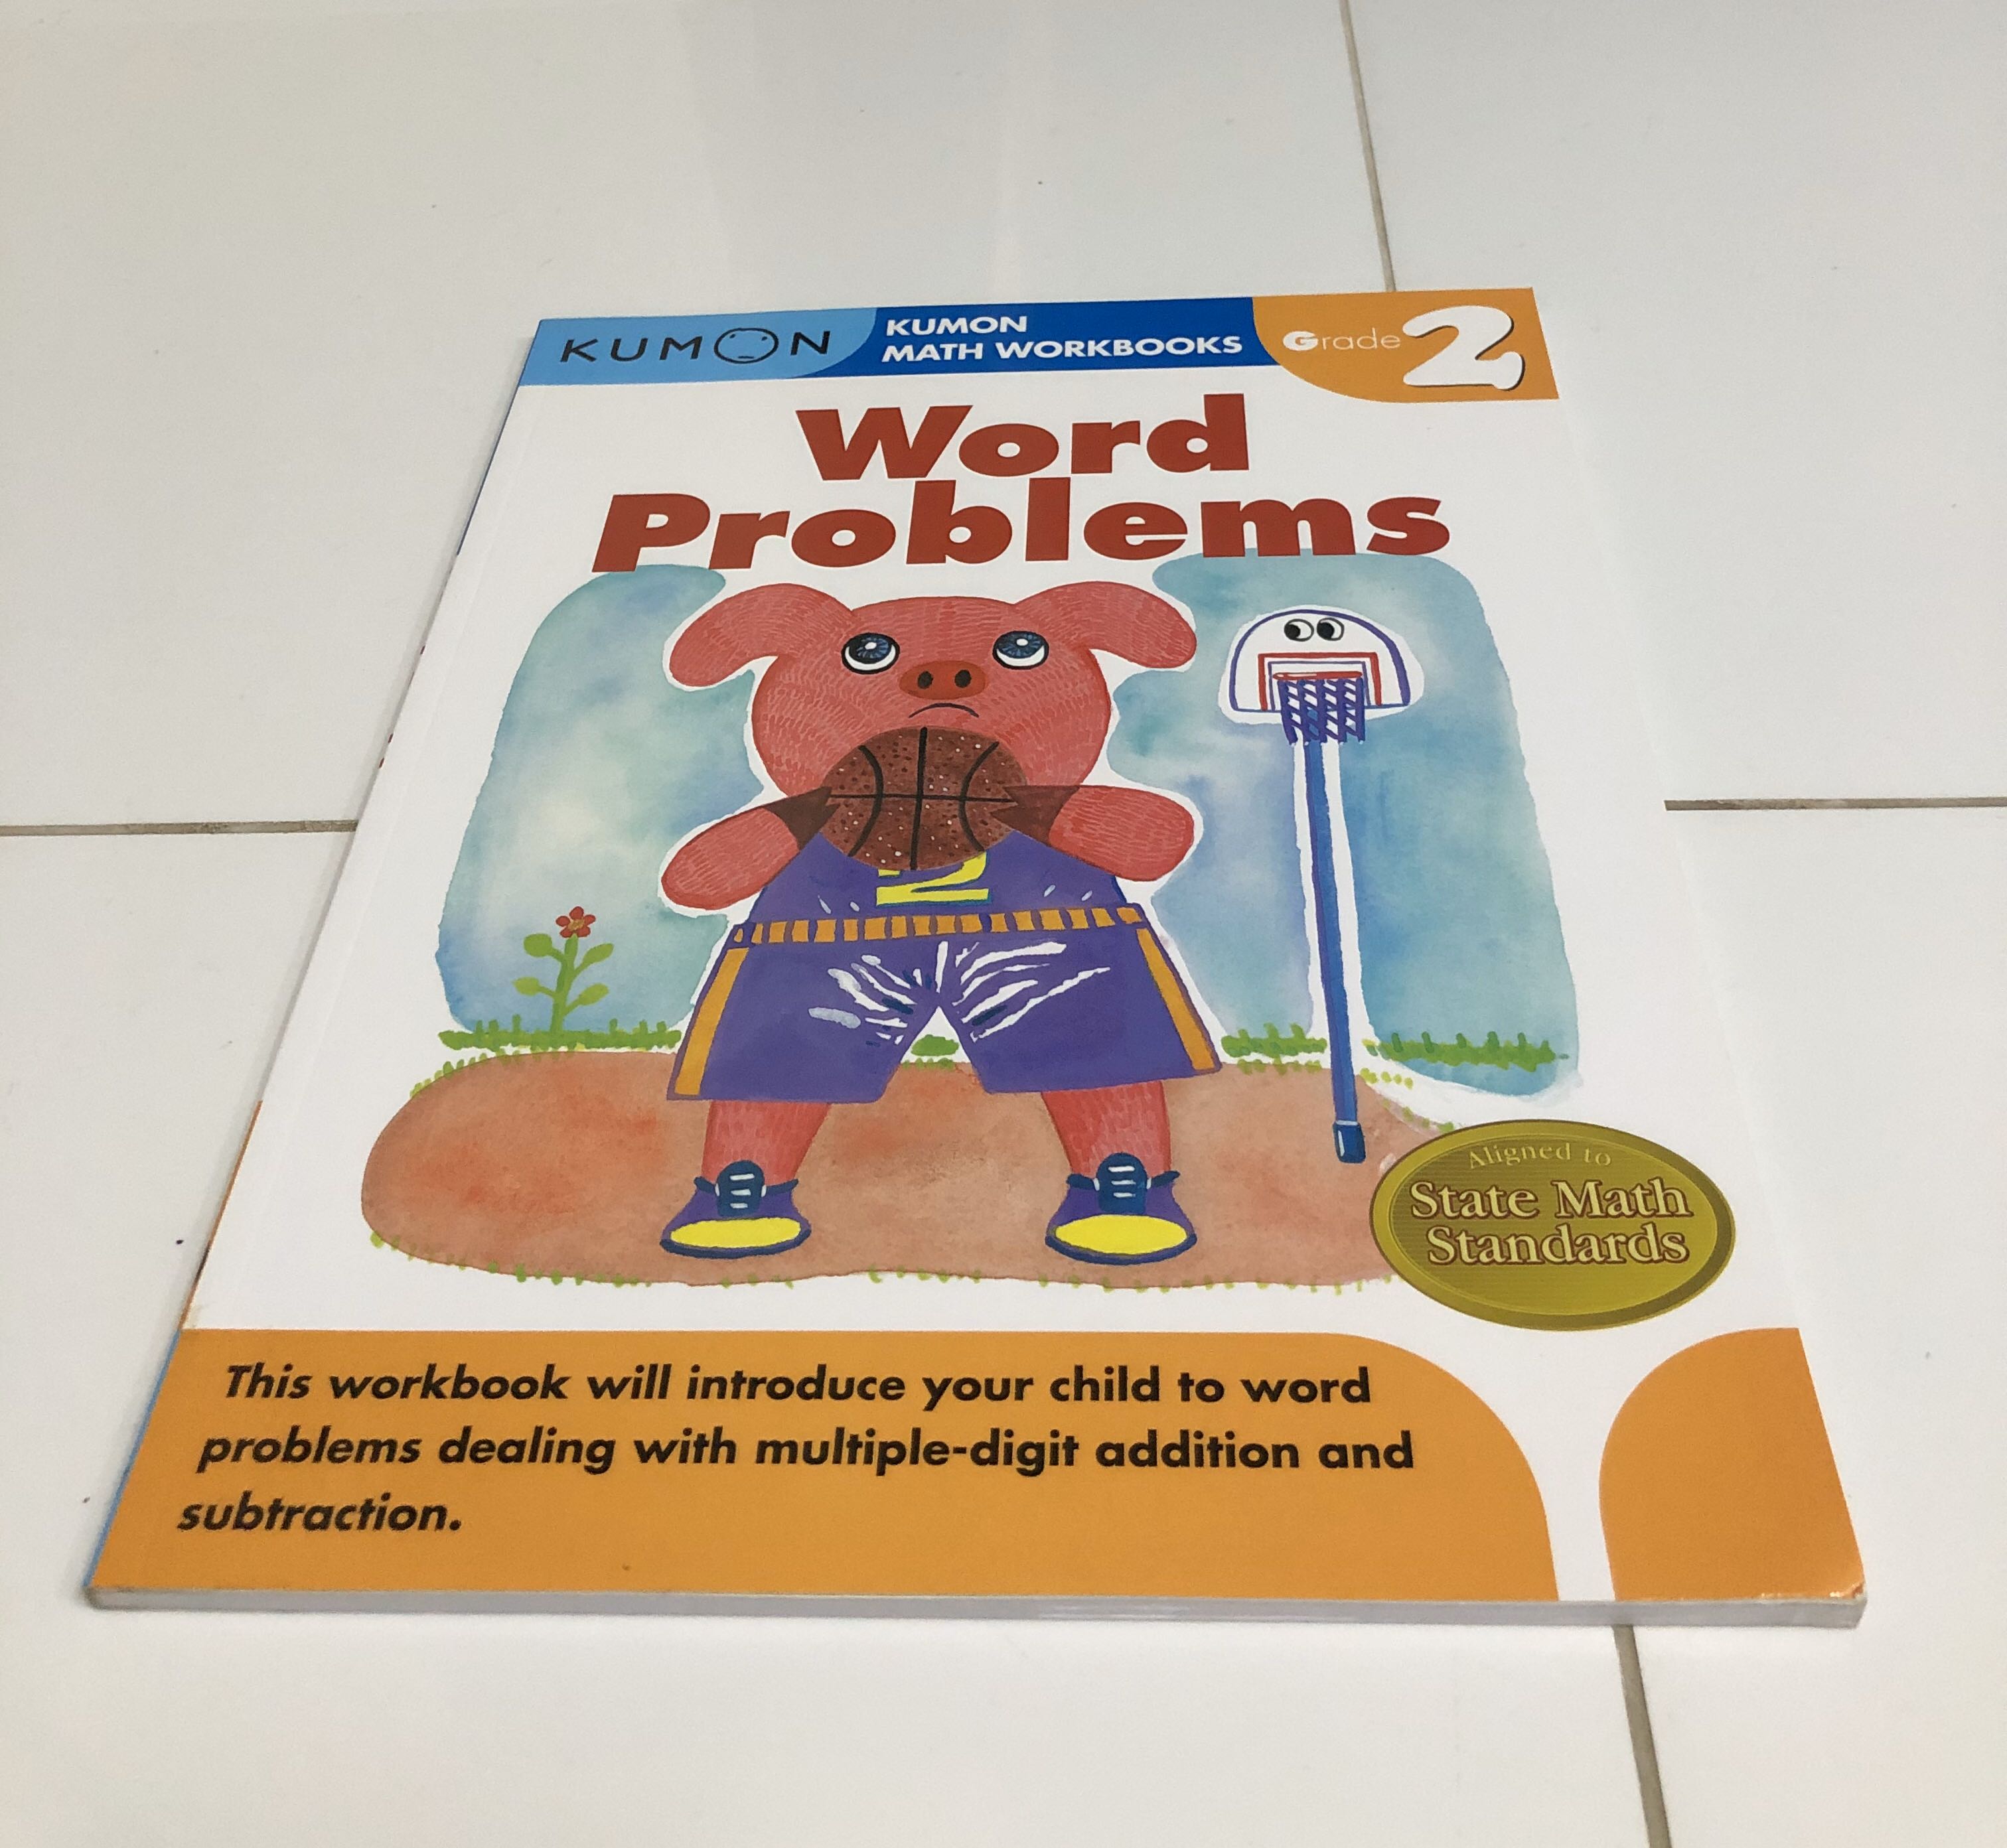 kumon-word-problems-for-grade-2-hobbies-toys-books-magazines